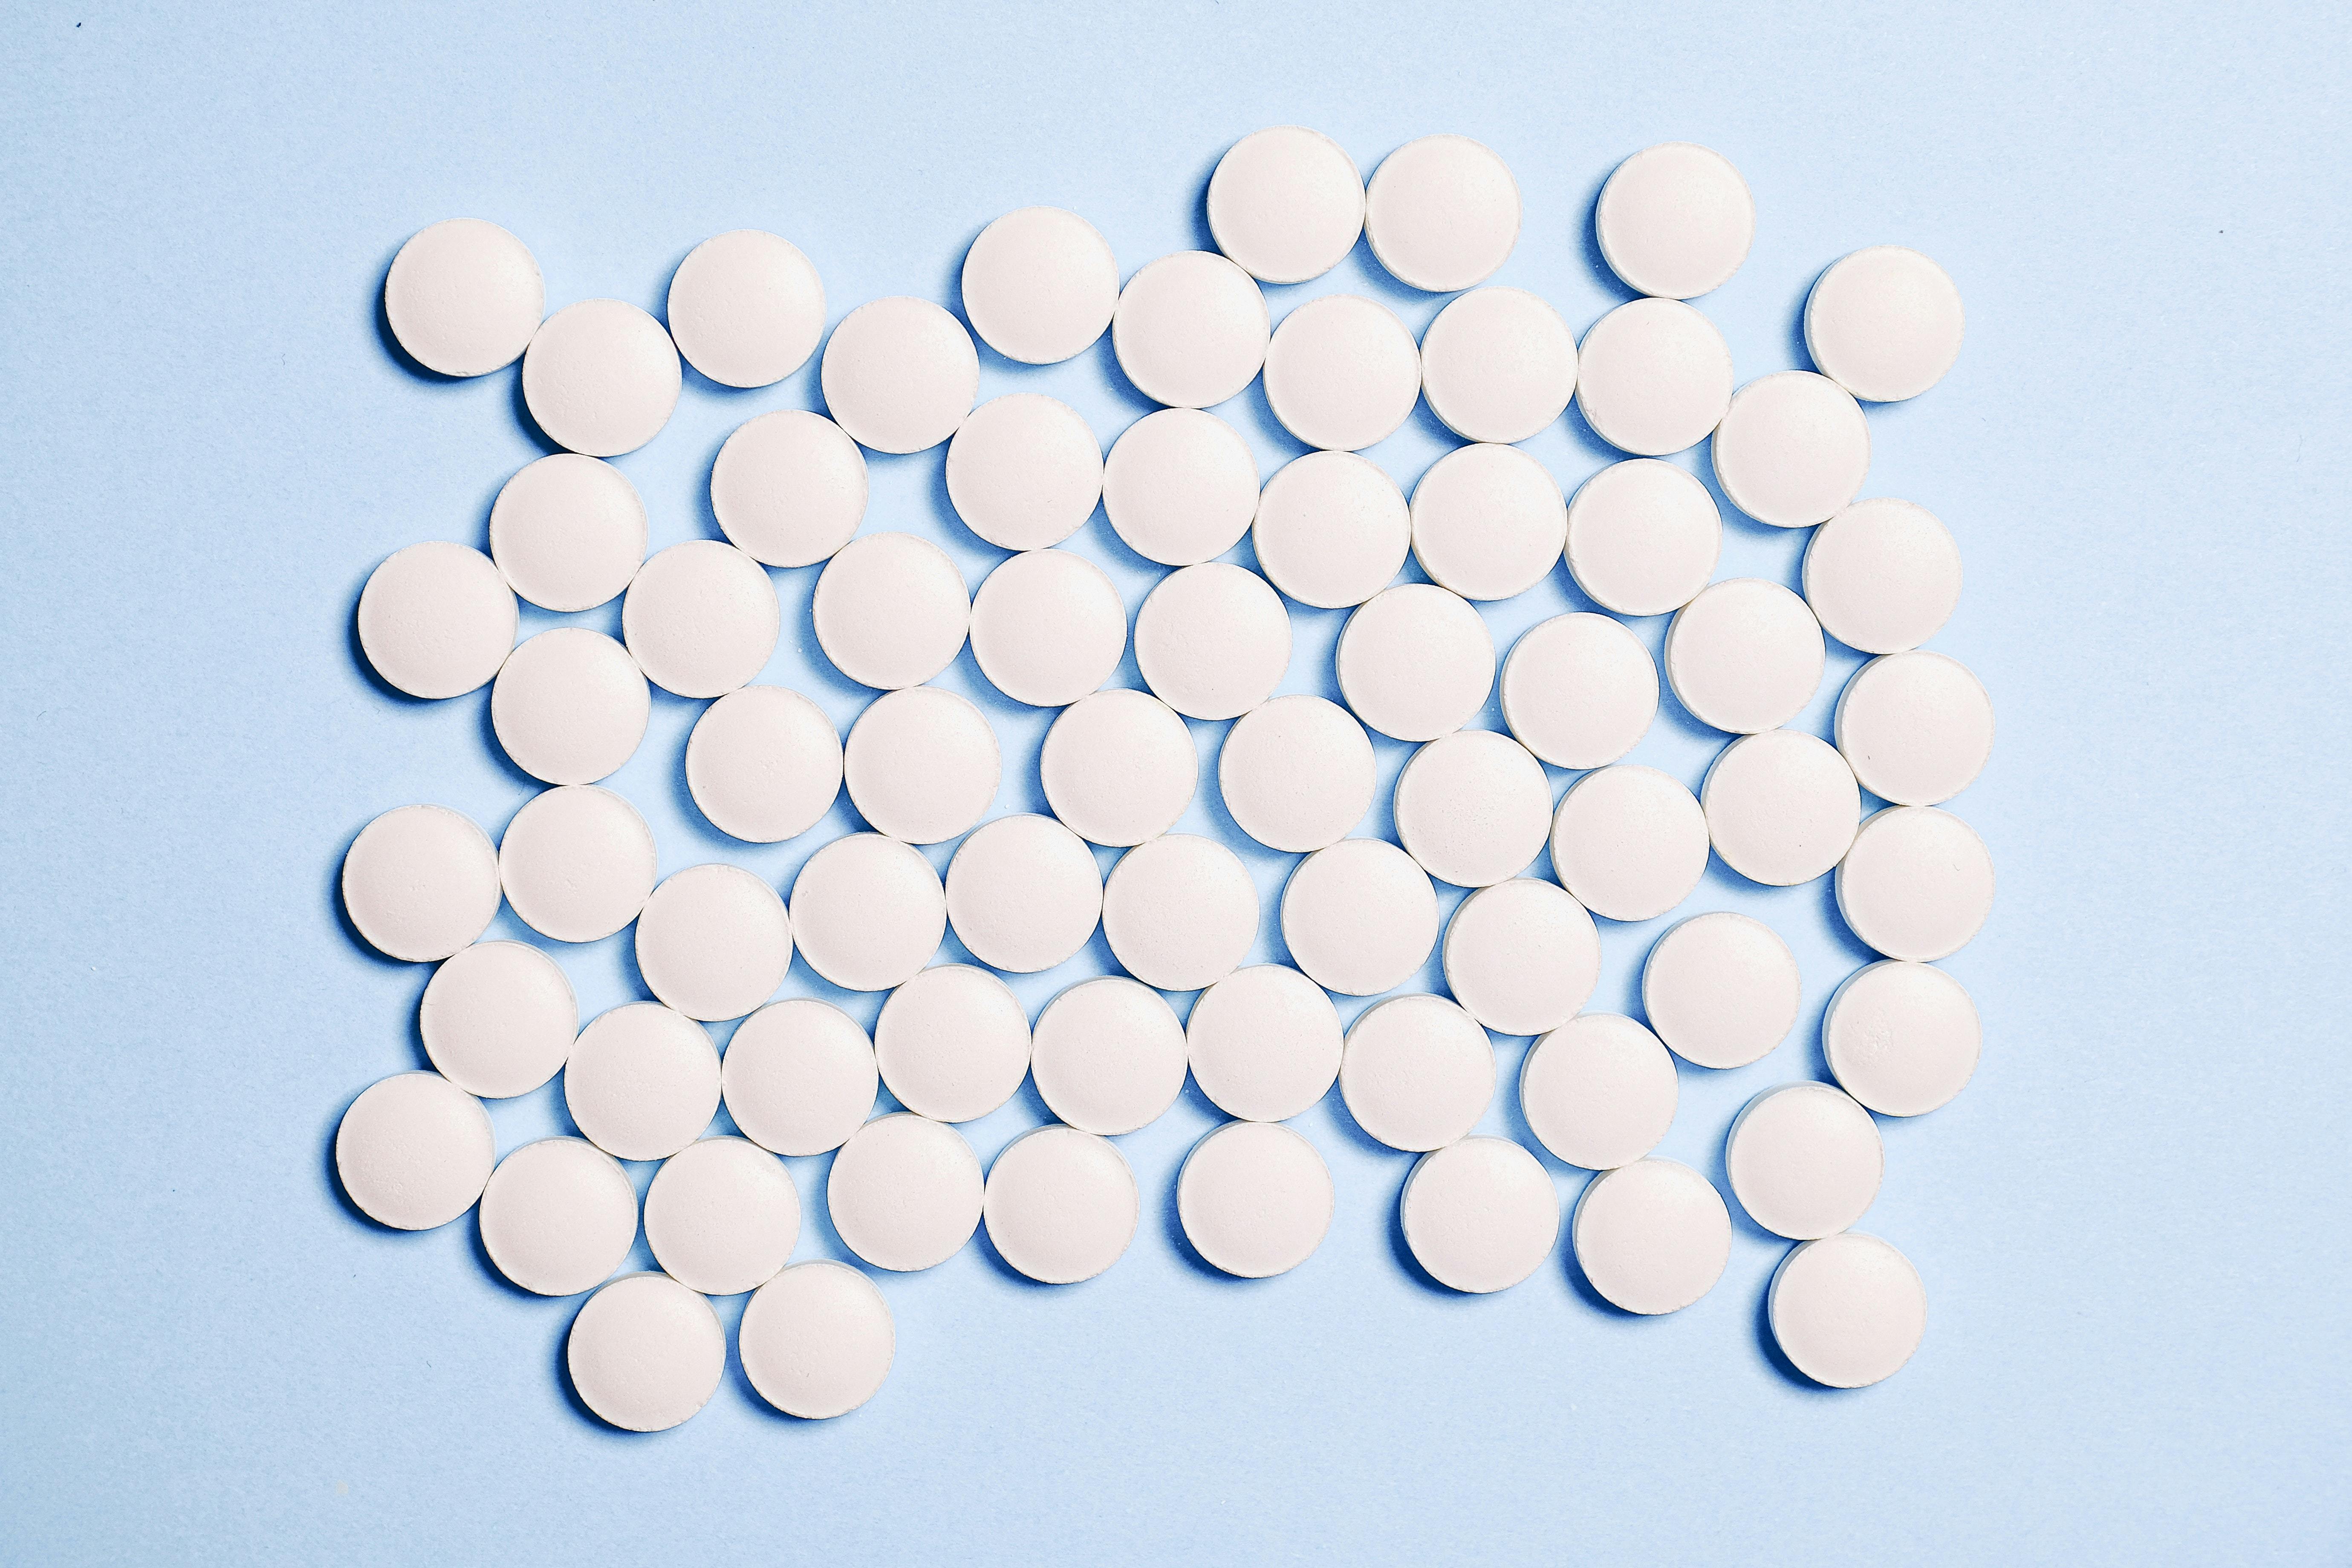 Hormone replacement therapy (HRT) tablets on blue background